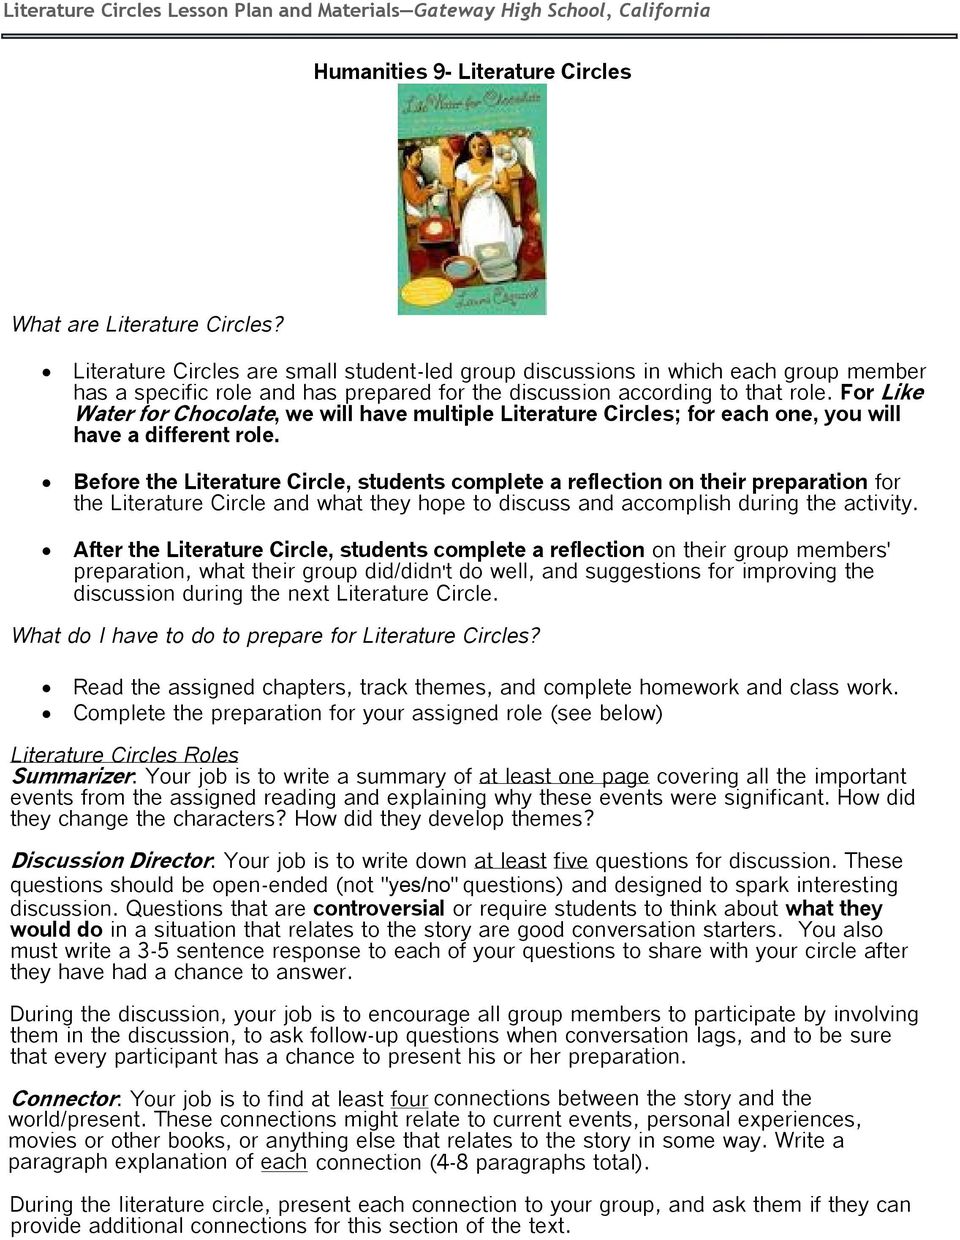 Literature Circles Lesson Plan And Materials Pdf Free Download